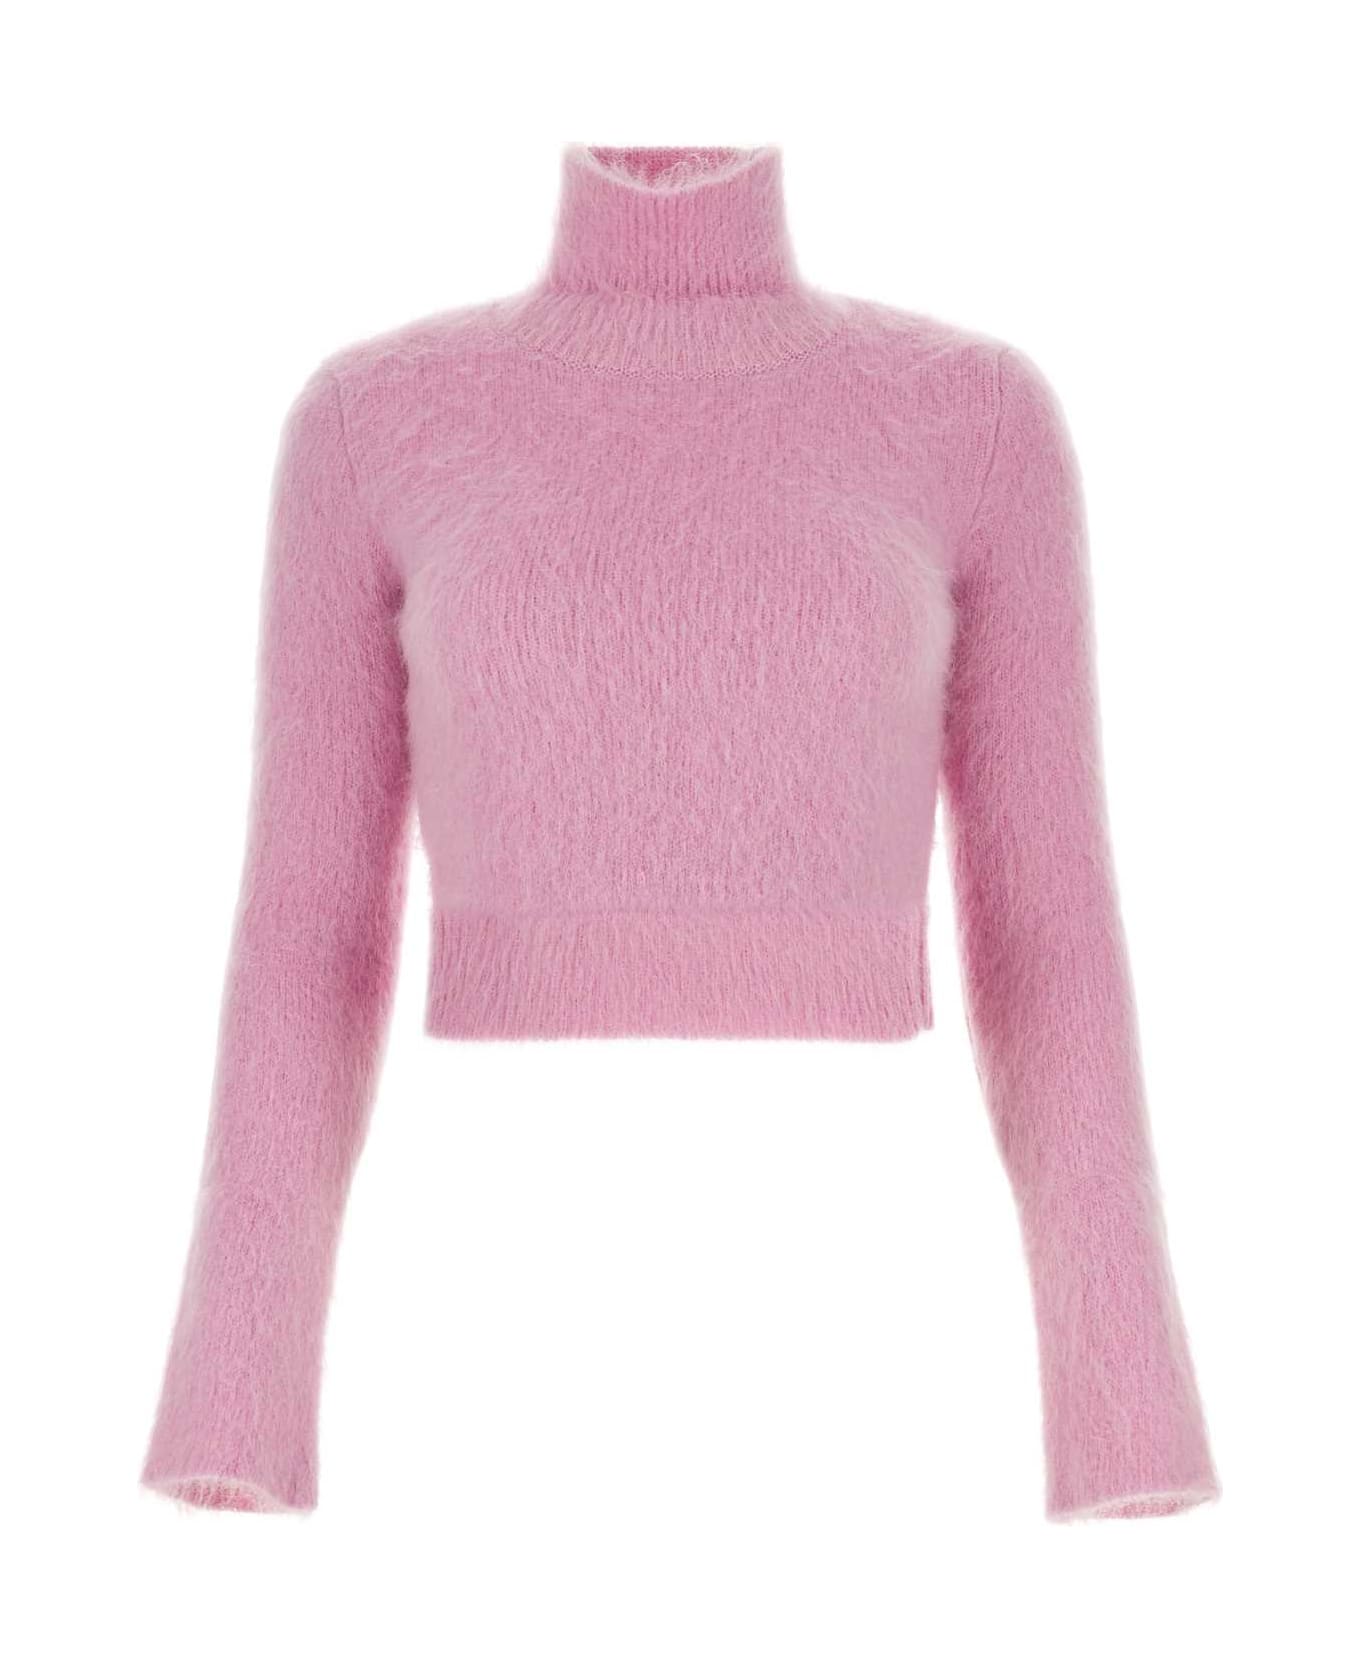 Paco Rabanne Pink Wool Blend Sweater - PINK